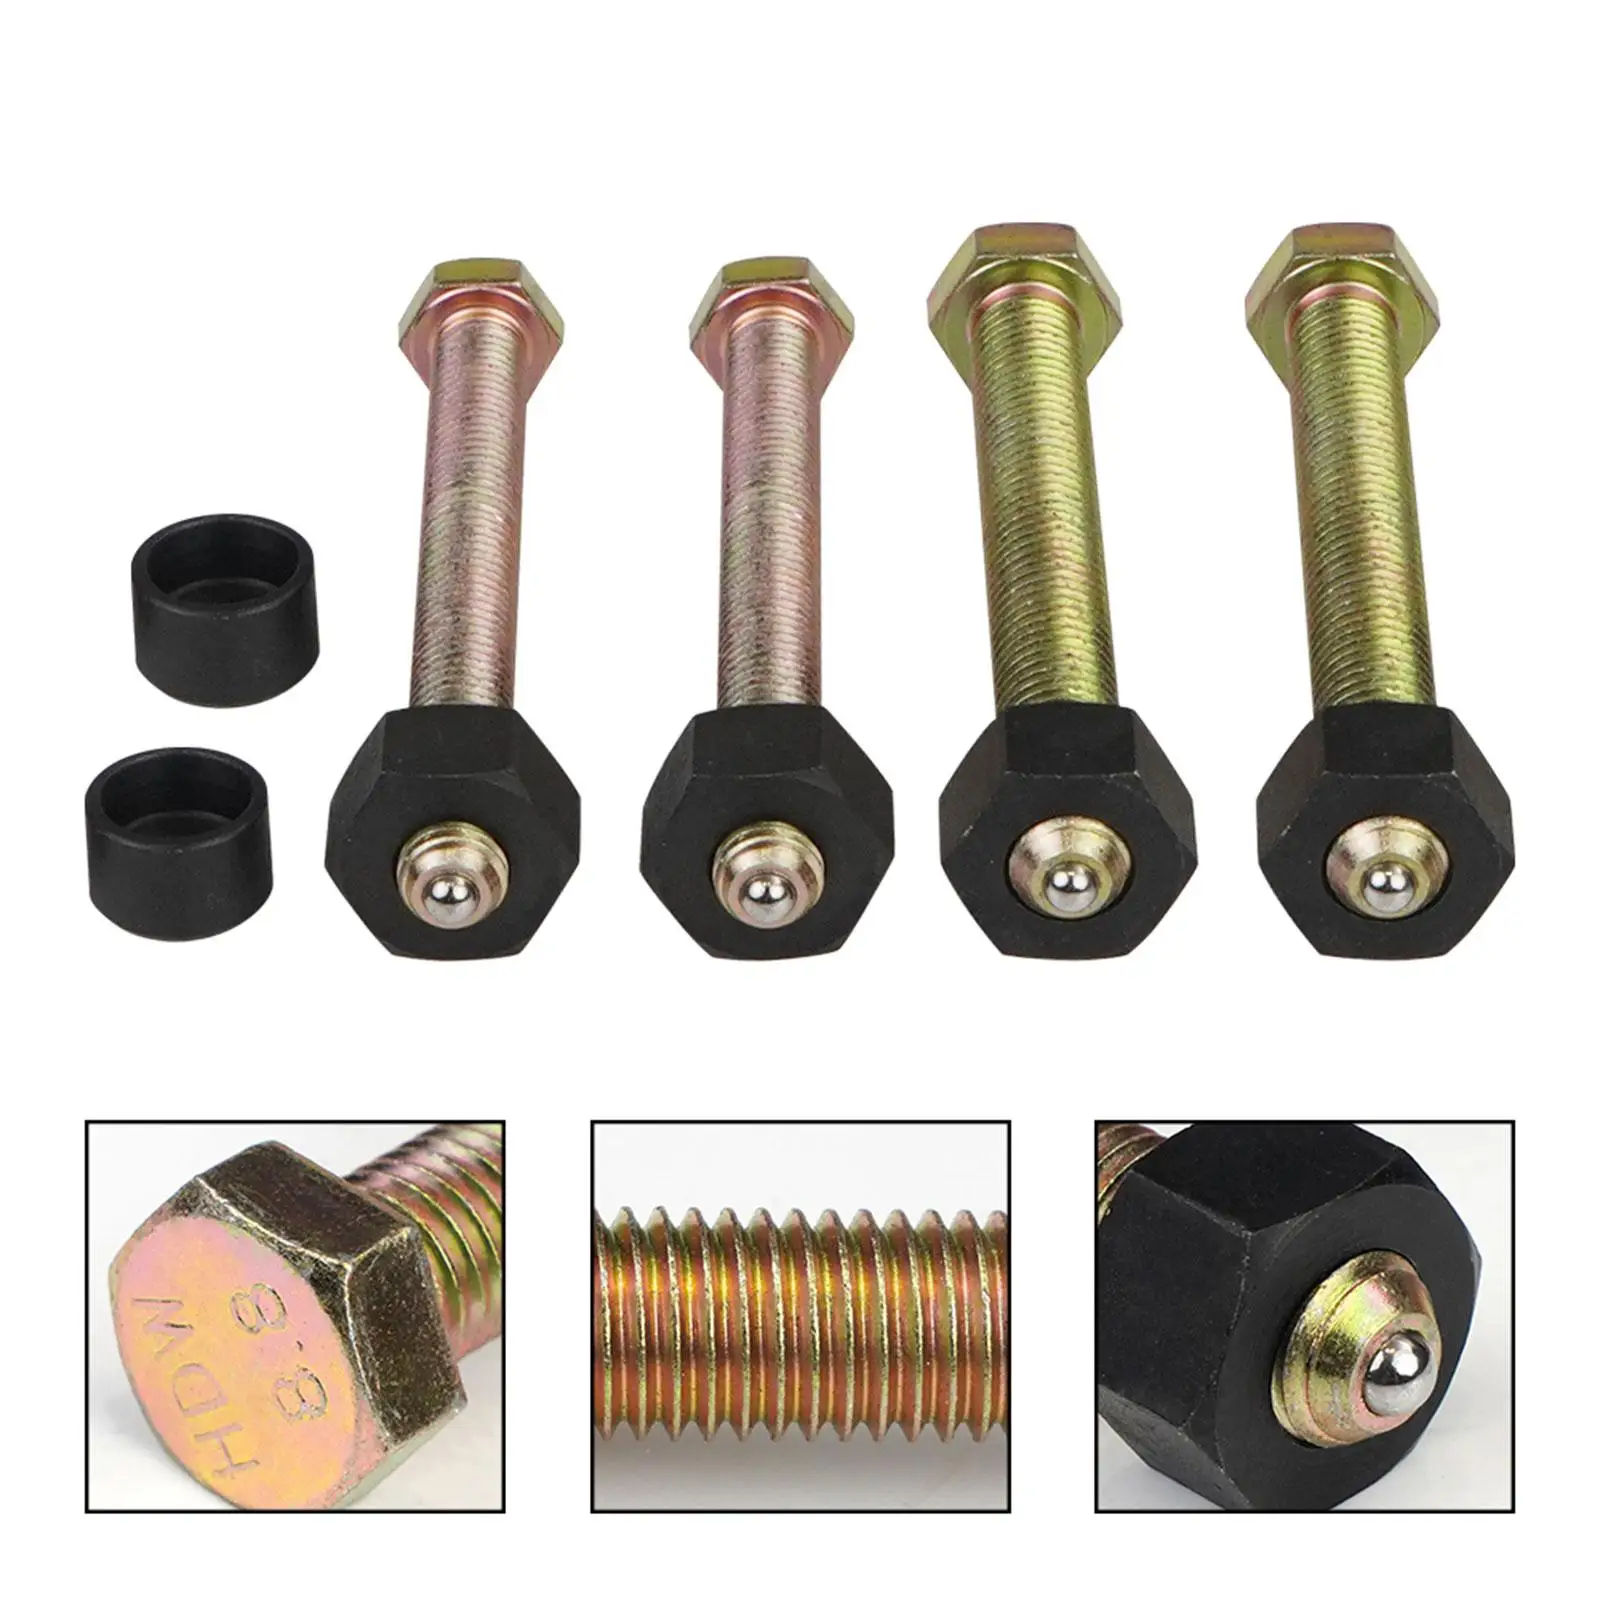 Impact Rated Hub Removal Bolt Set 78834 Easy Installation Replaces M12 M14 Nut Professional Accessories Assembly Pneumatic Tools